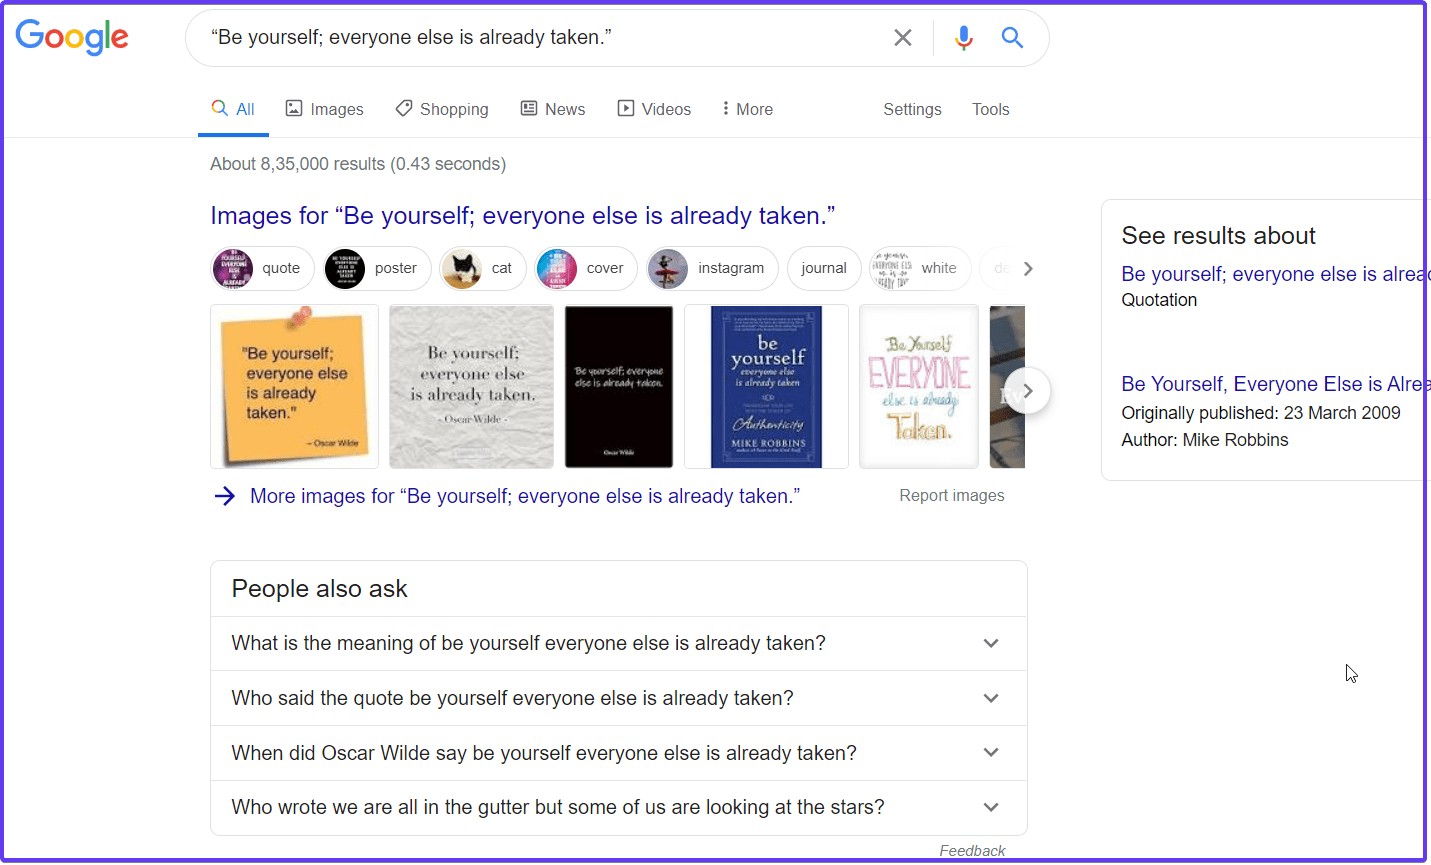 Searching for a specific phrase on the Google search engine